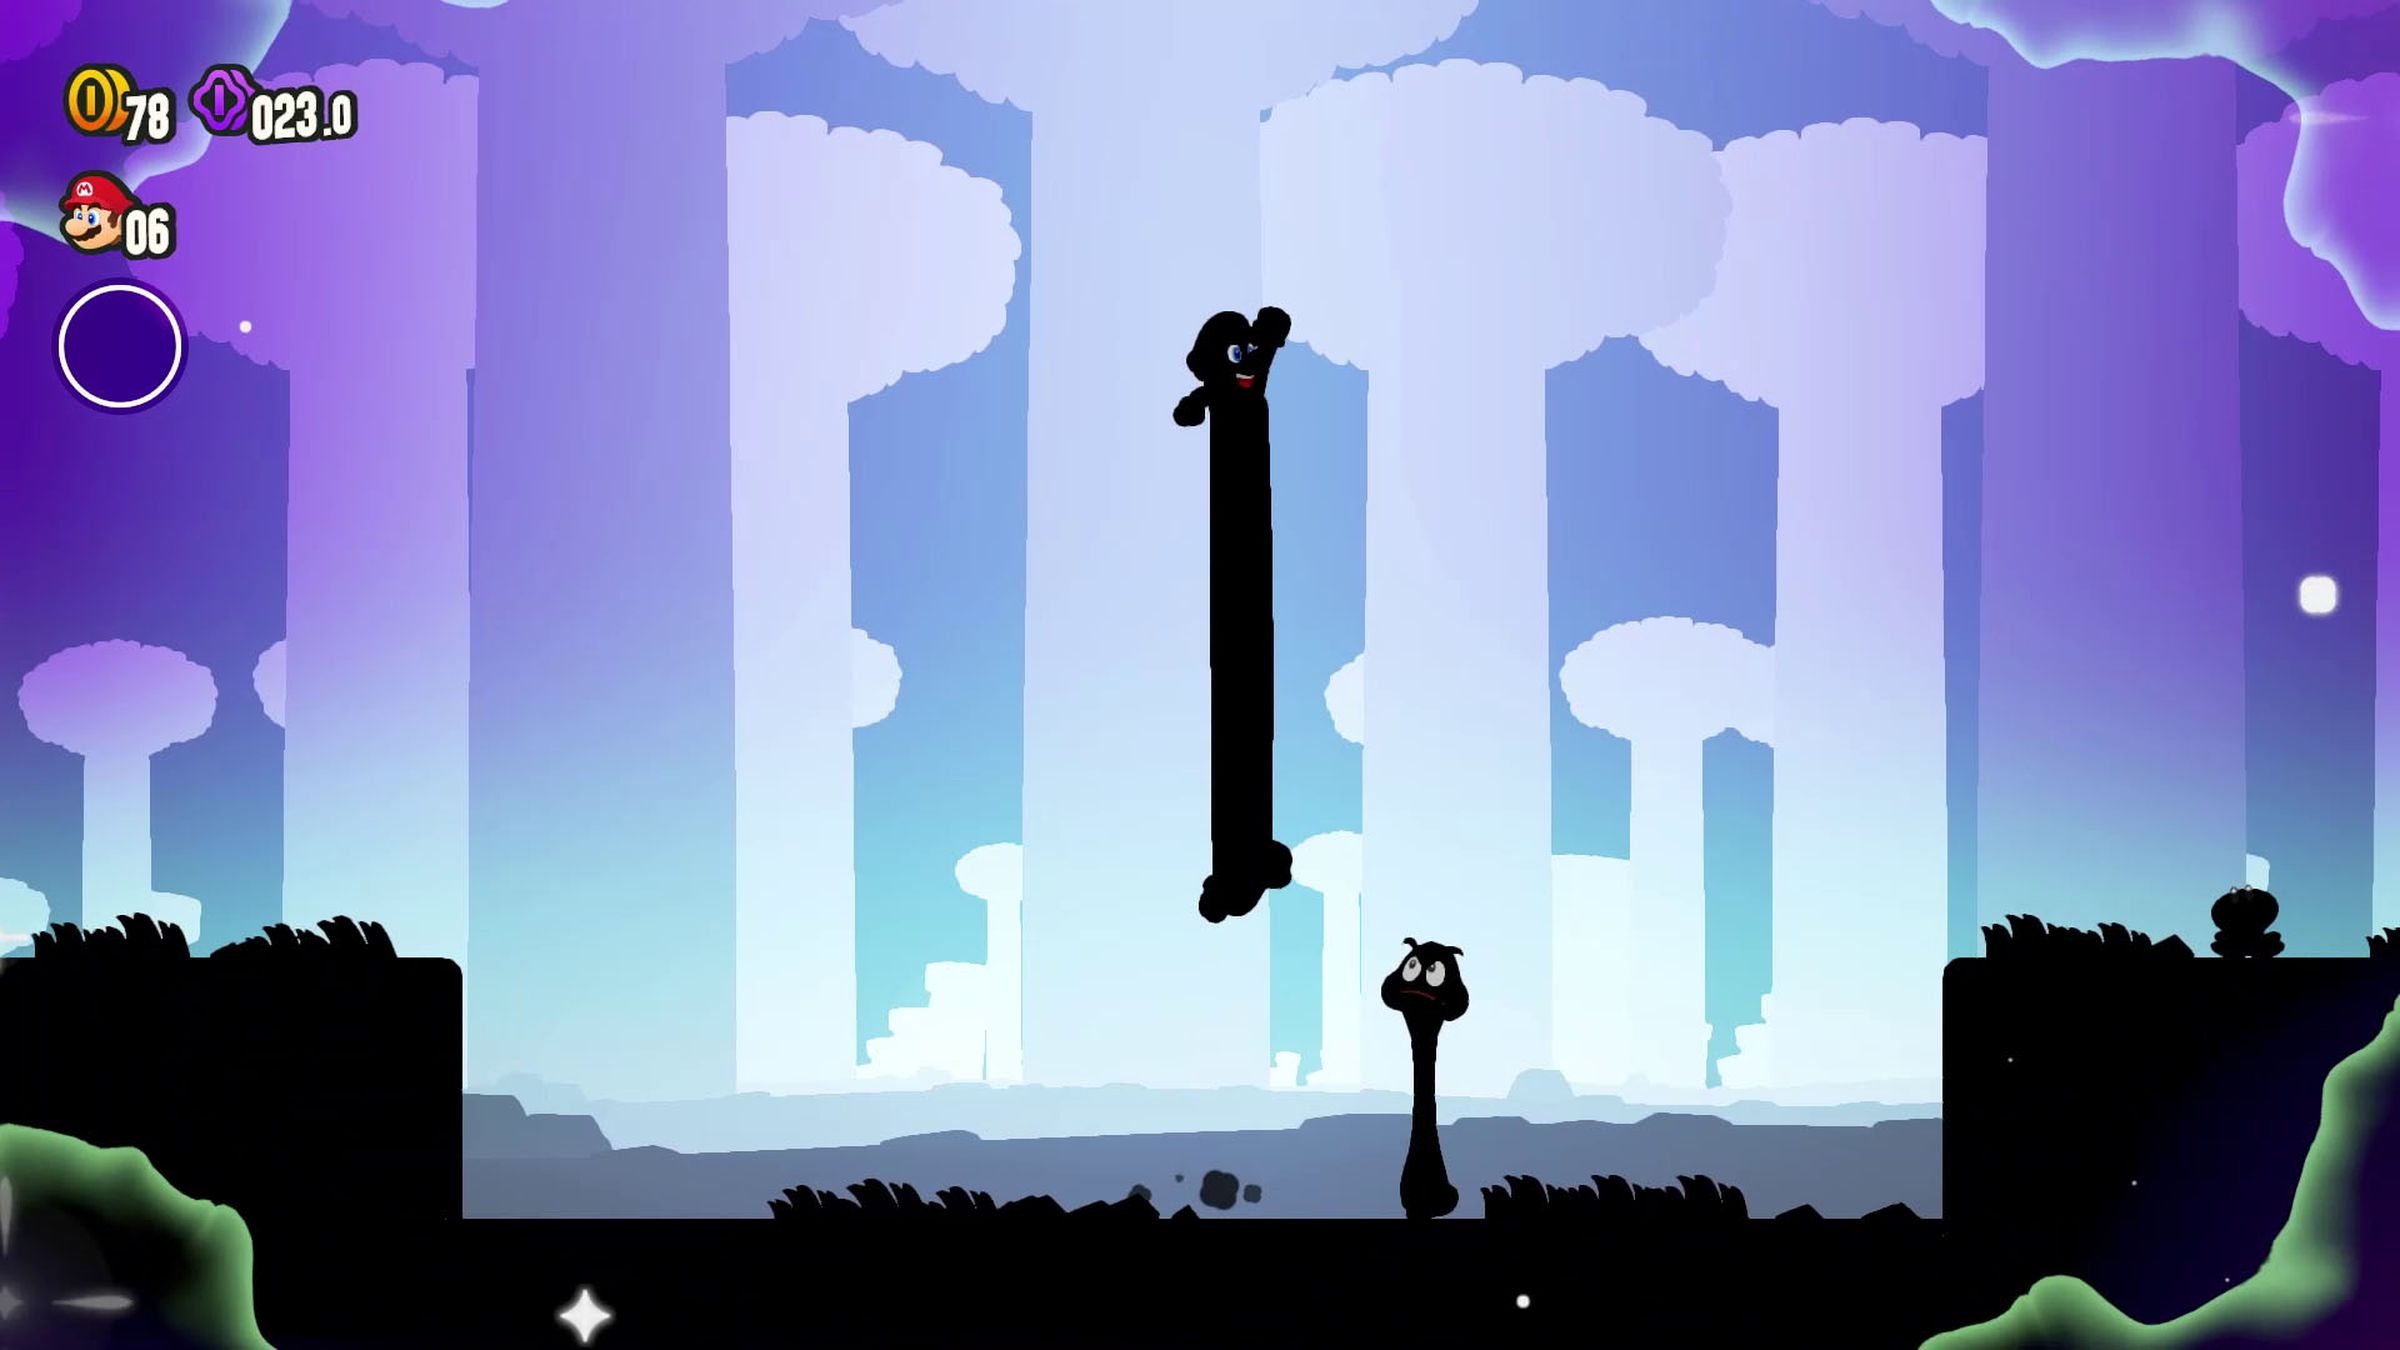 A screenshot from the video game Super Mario Bros. Wonder in which a tall Mario, rendered only in silhouette, jumps towards a tall goomba.